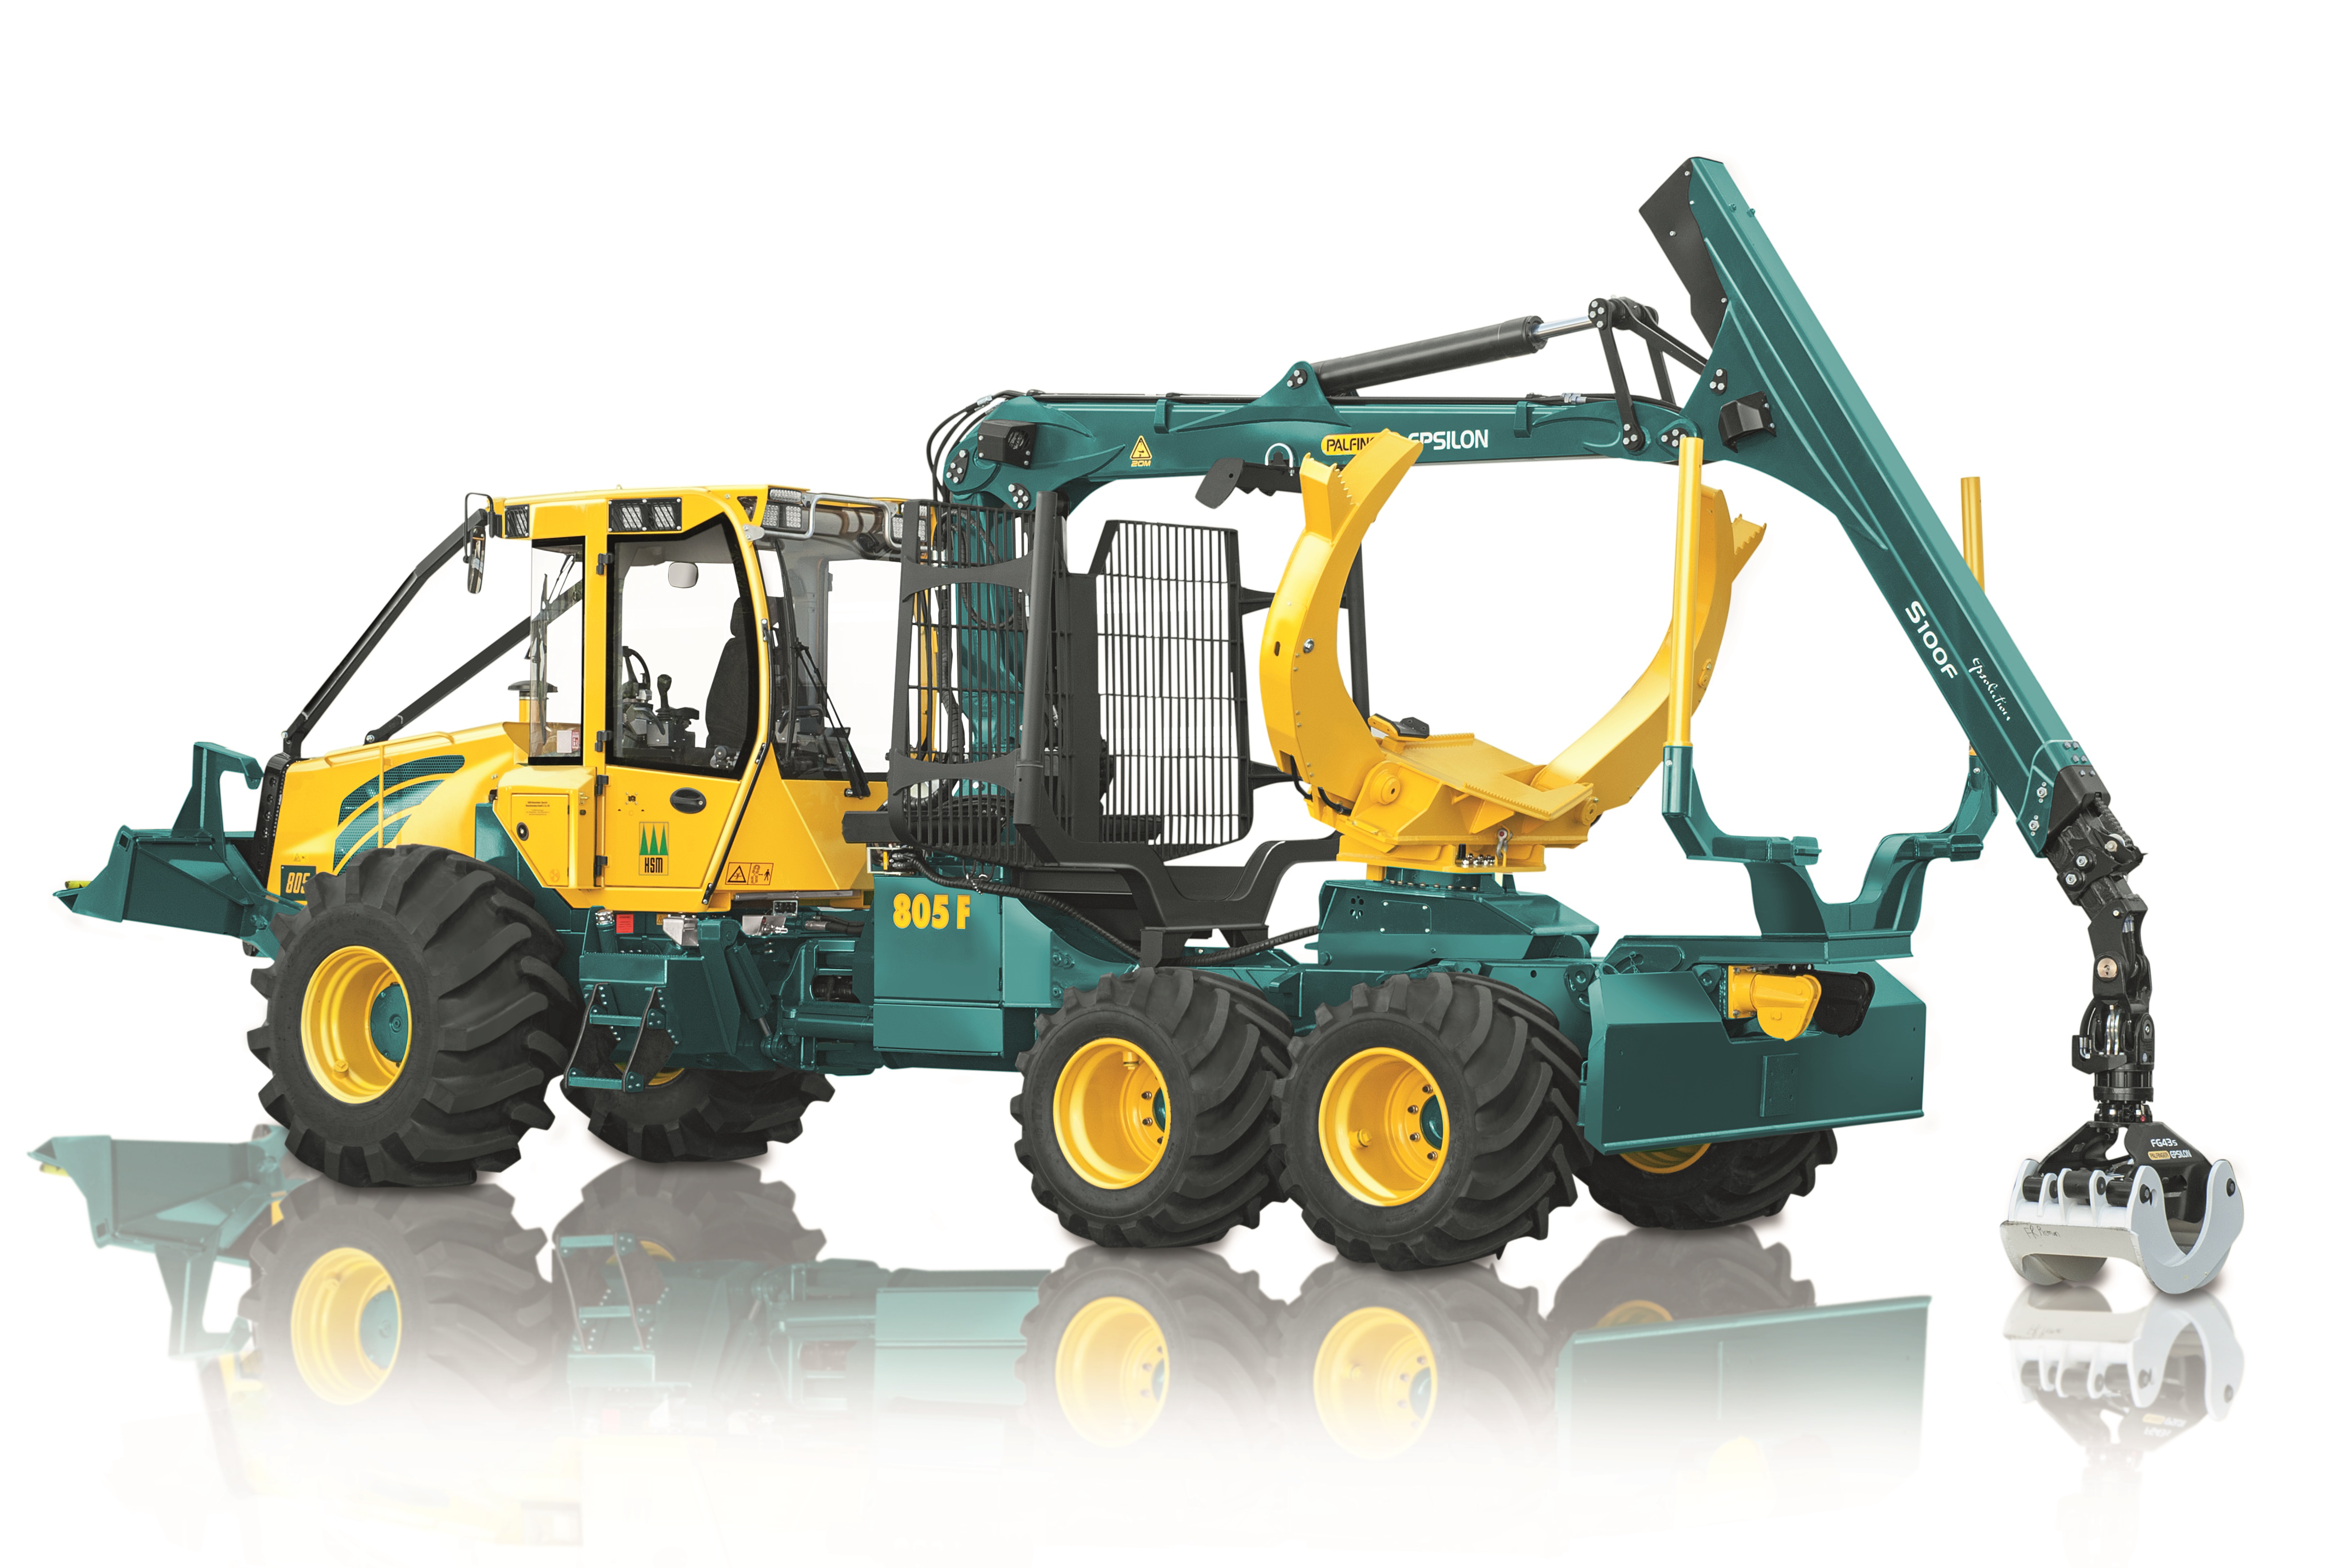 Forest Machinery Services